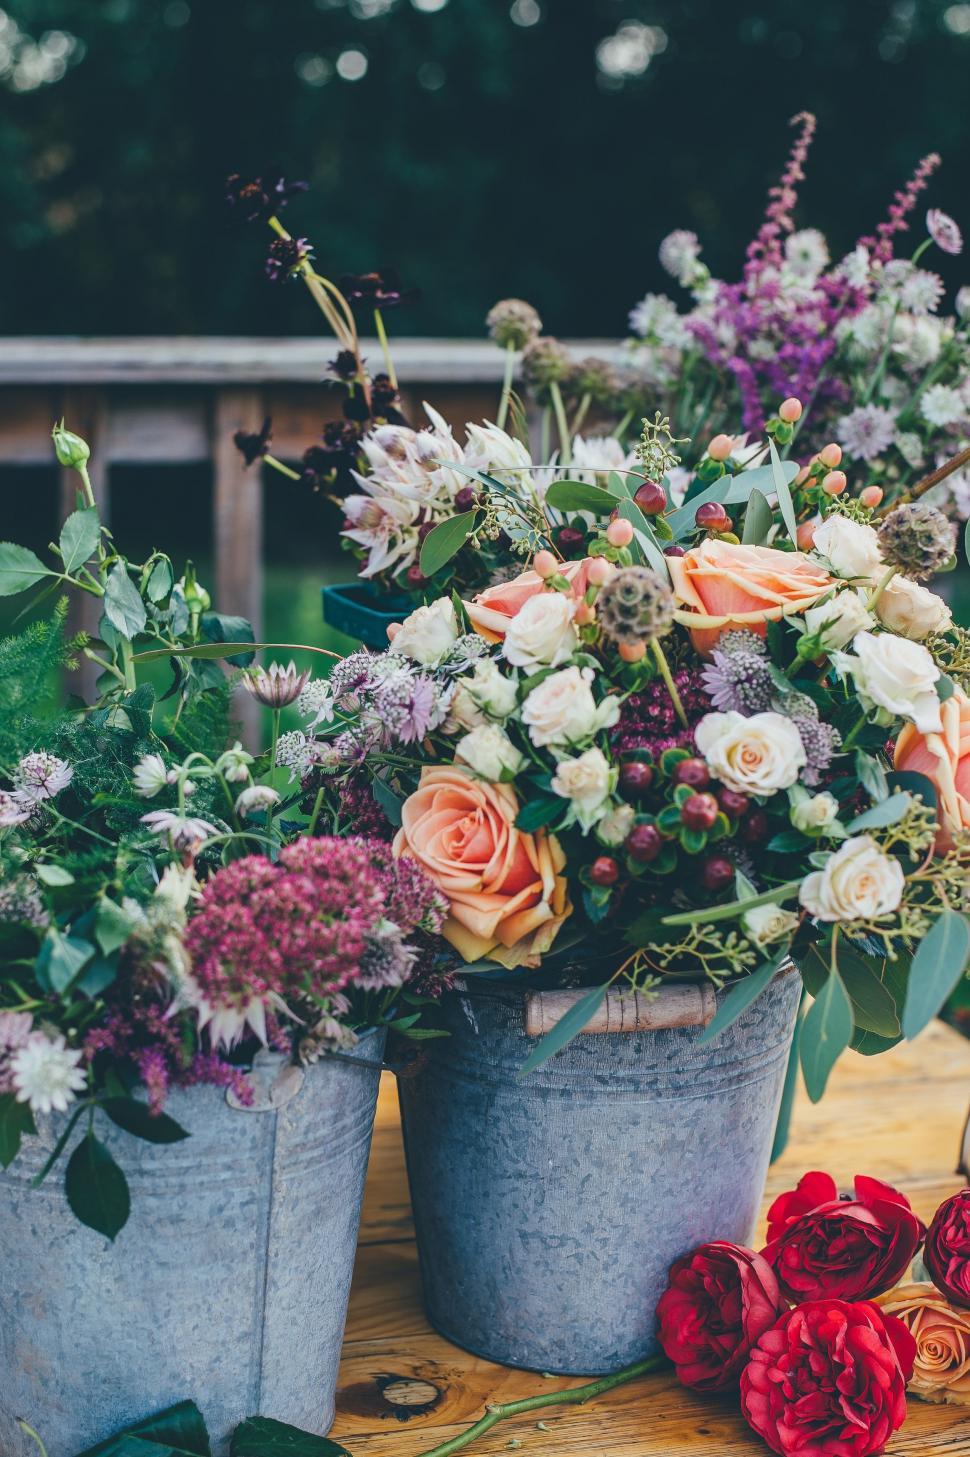 Free Image of Table With Two Buckets of Flowers 